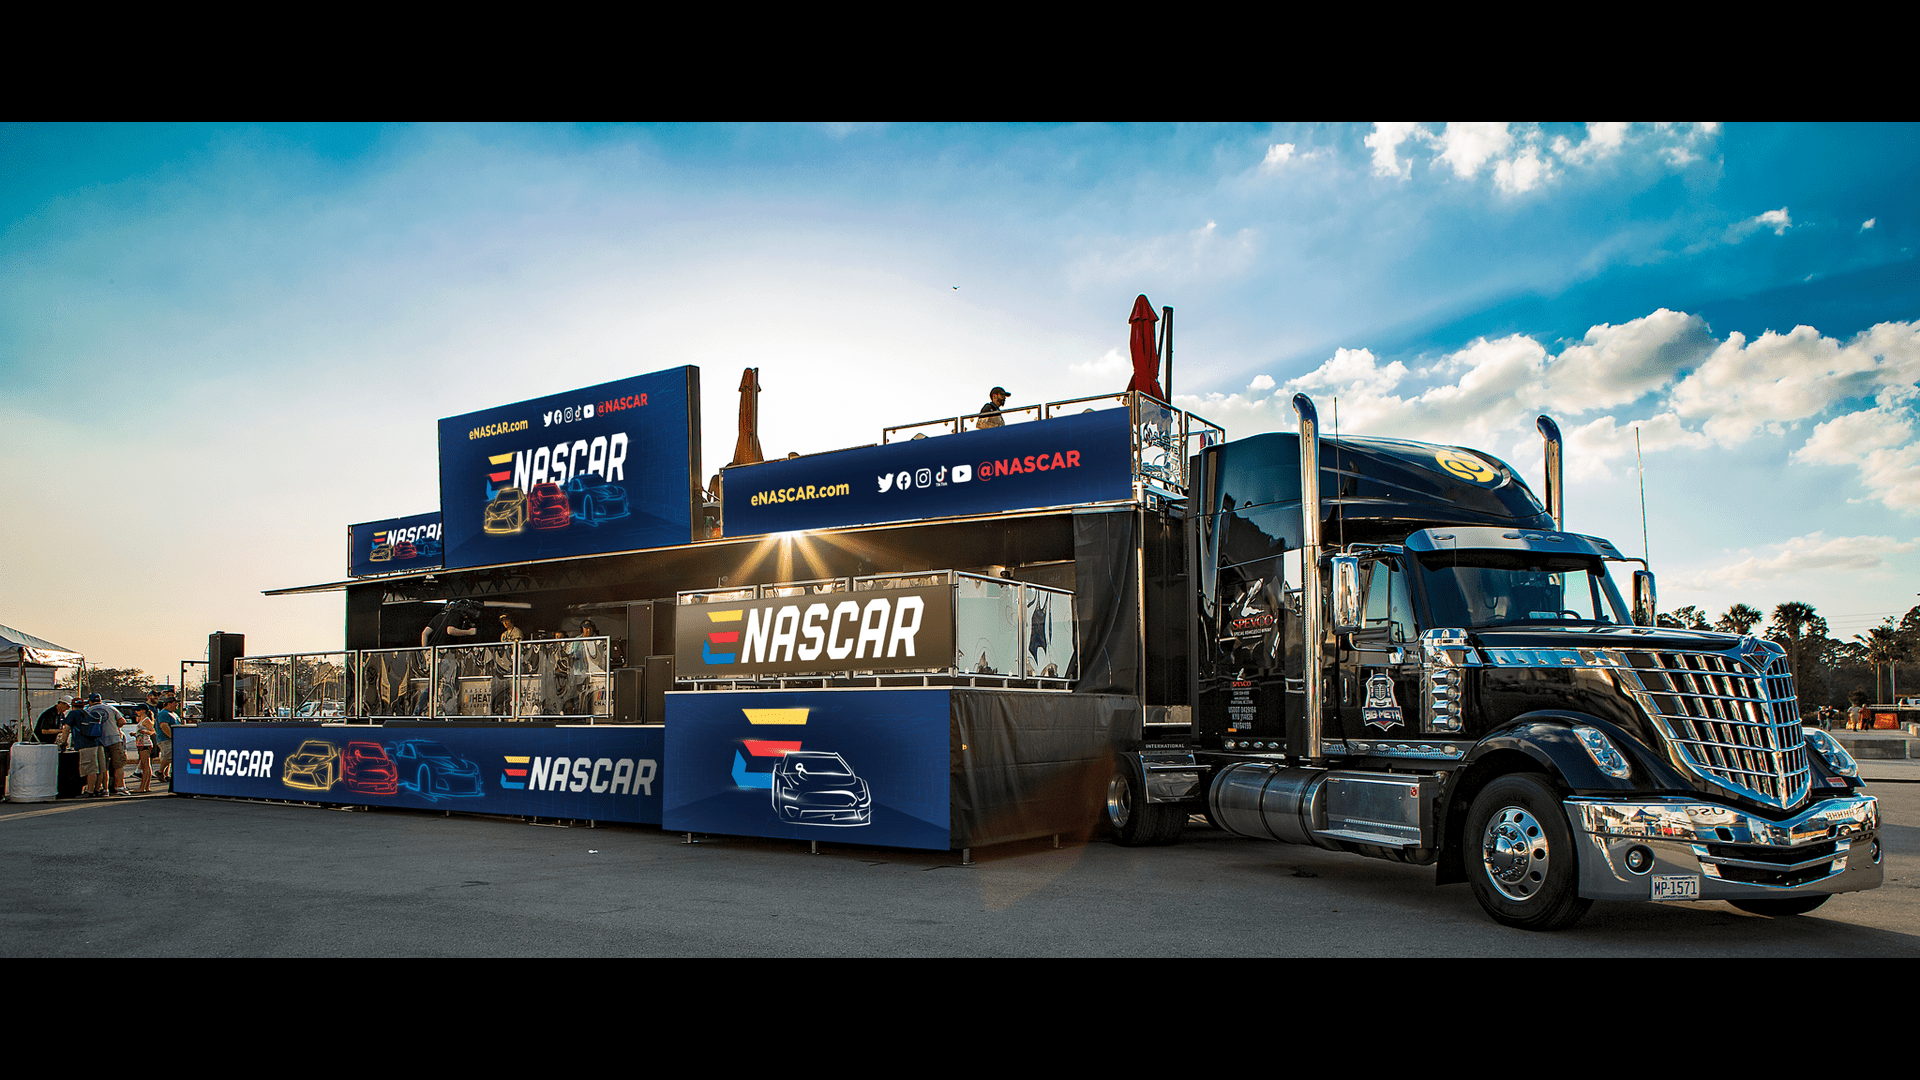 NASCAR, Allied Esports To Tour 18-wheel Gaming Truck At Select NASCAR Races